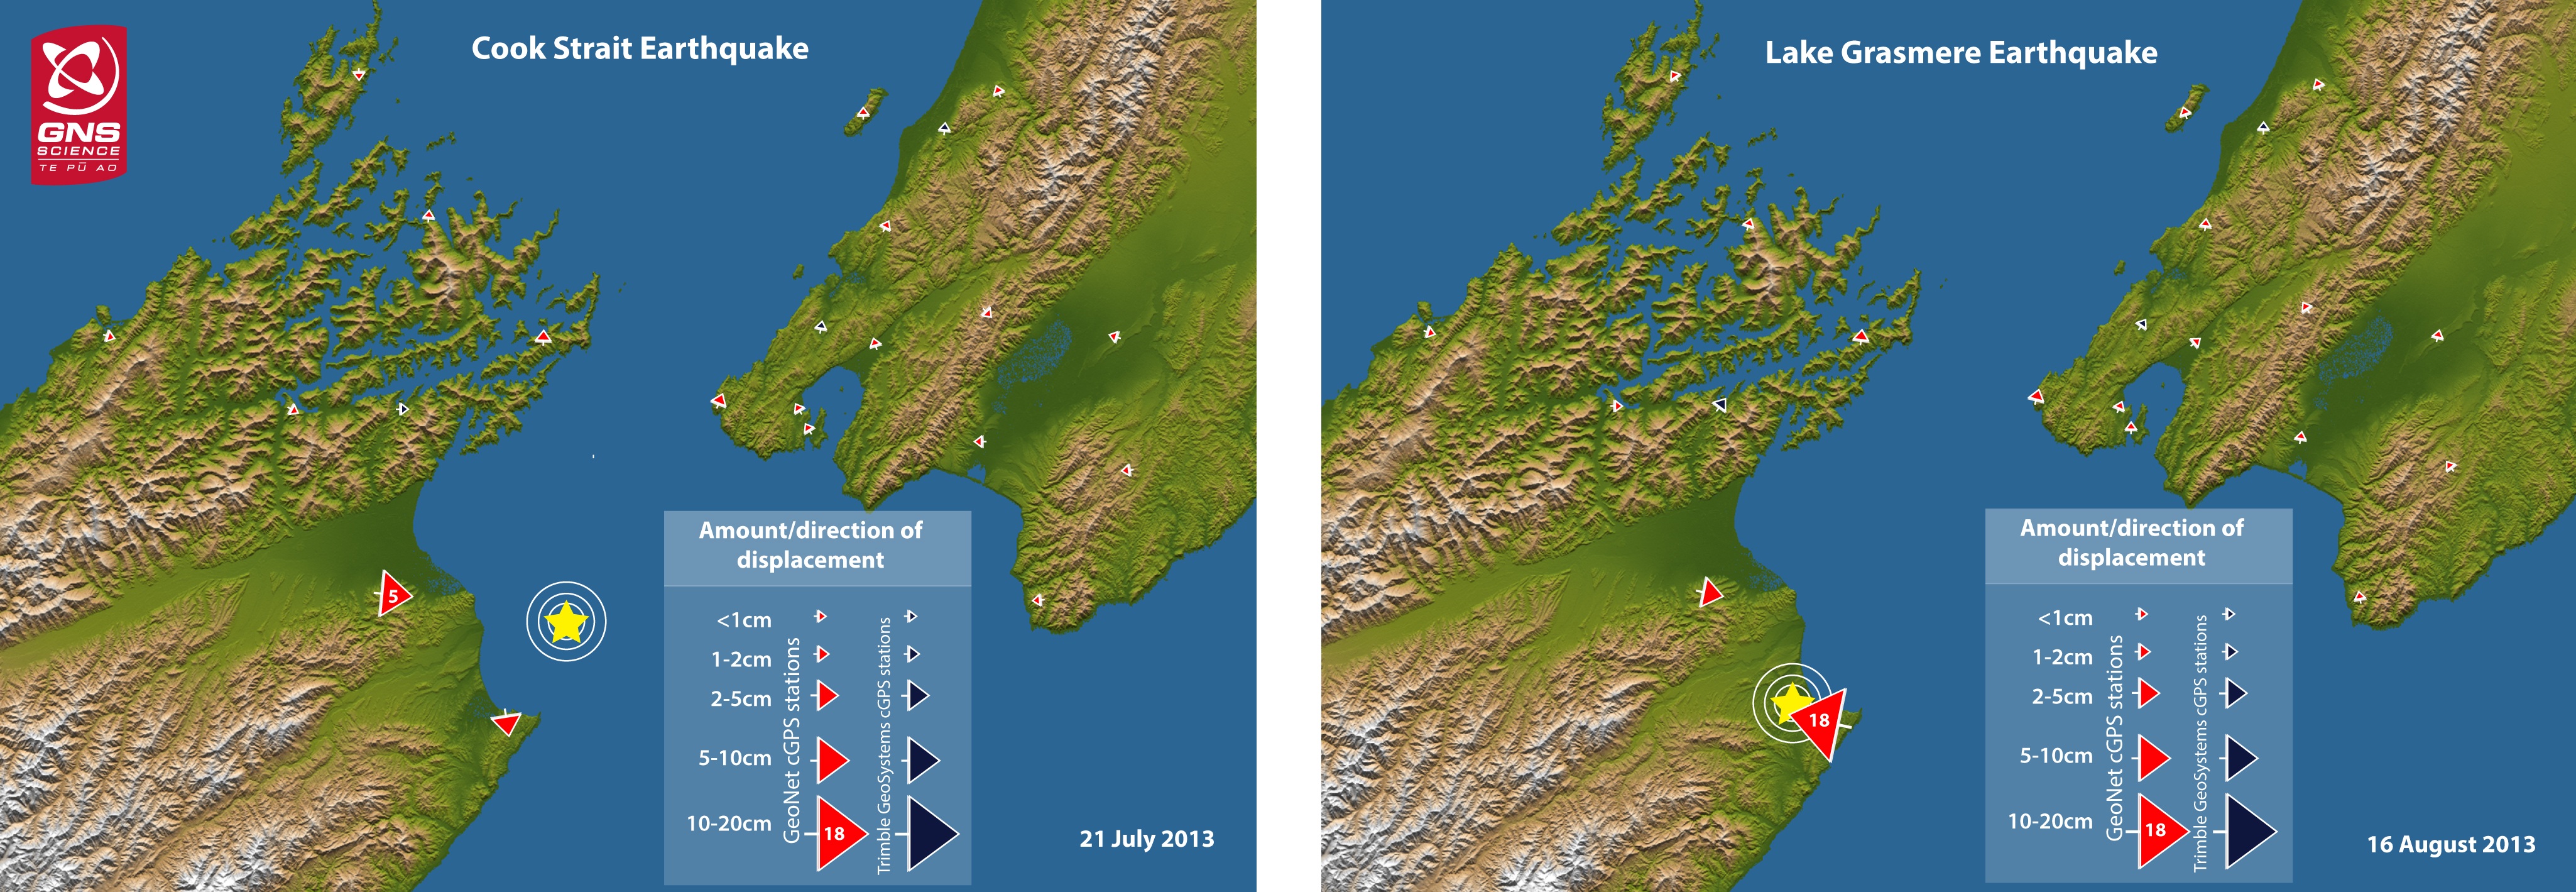 Land displacement of GPS stations in both the M6.5 Cook Strait and M6.6 Lake Grassmere. The greatest displacement was seen at Cape Campbell during the M6.6 earthquake, land here moved 18cm to the west.